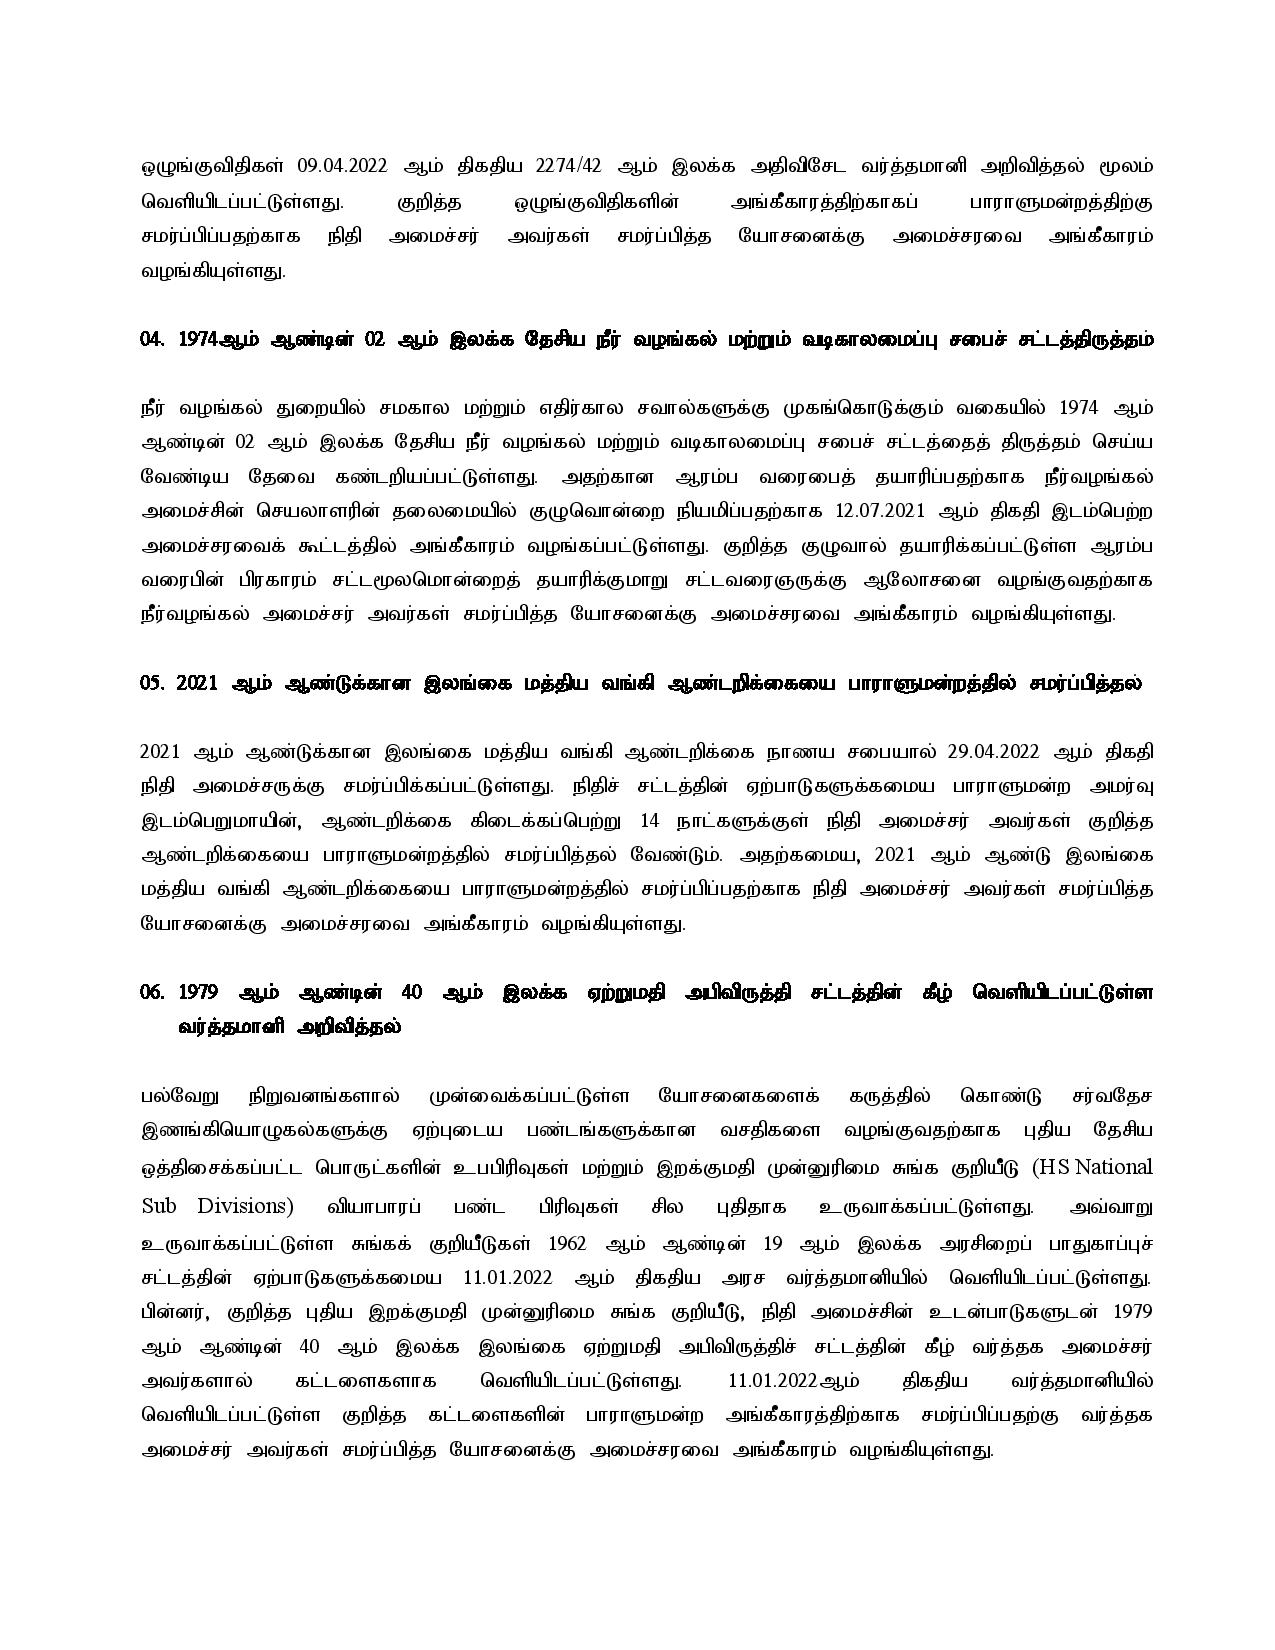 Cabinet Decisions on 02.05.2022 Tamil page 002